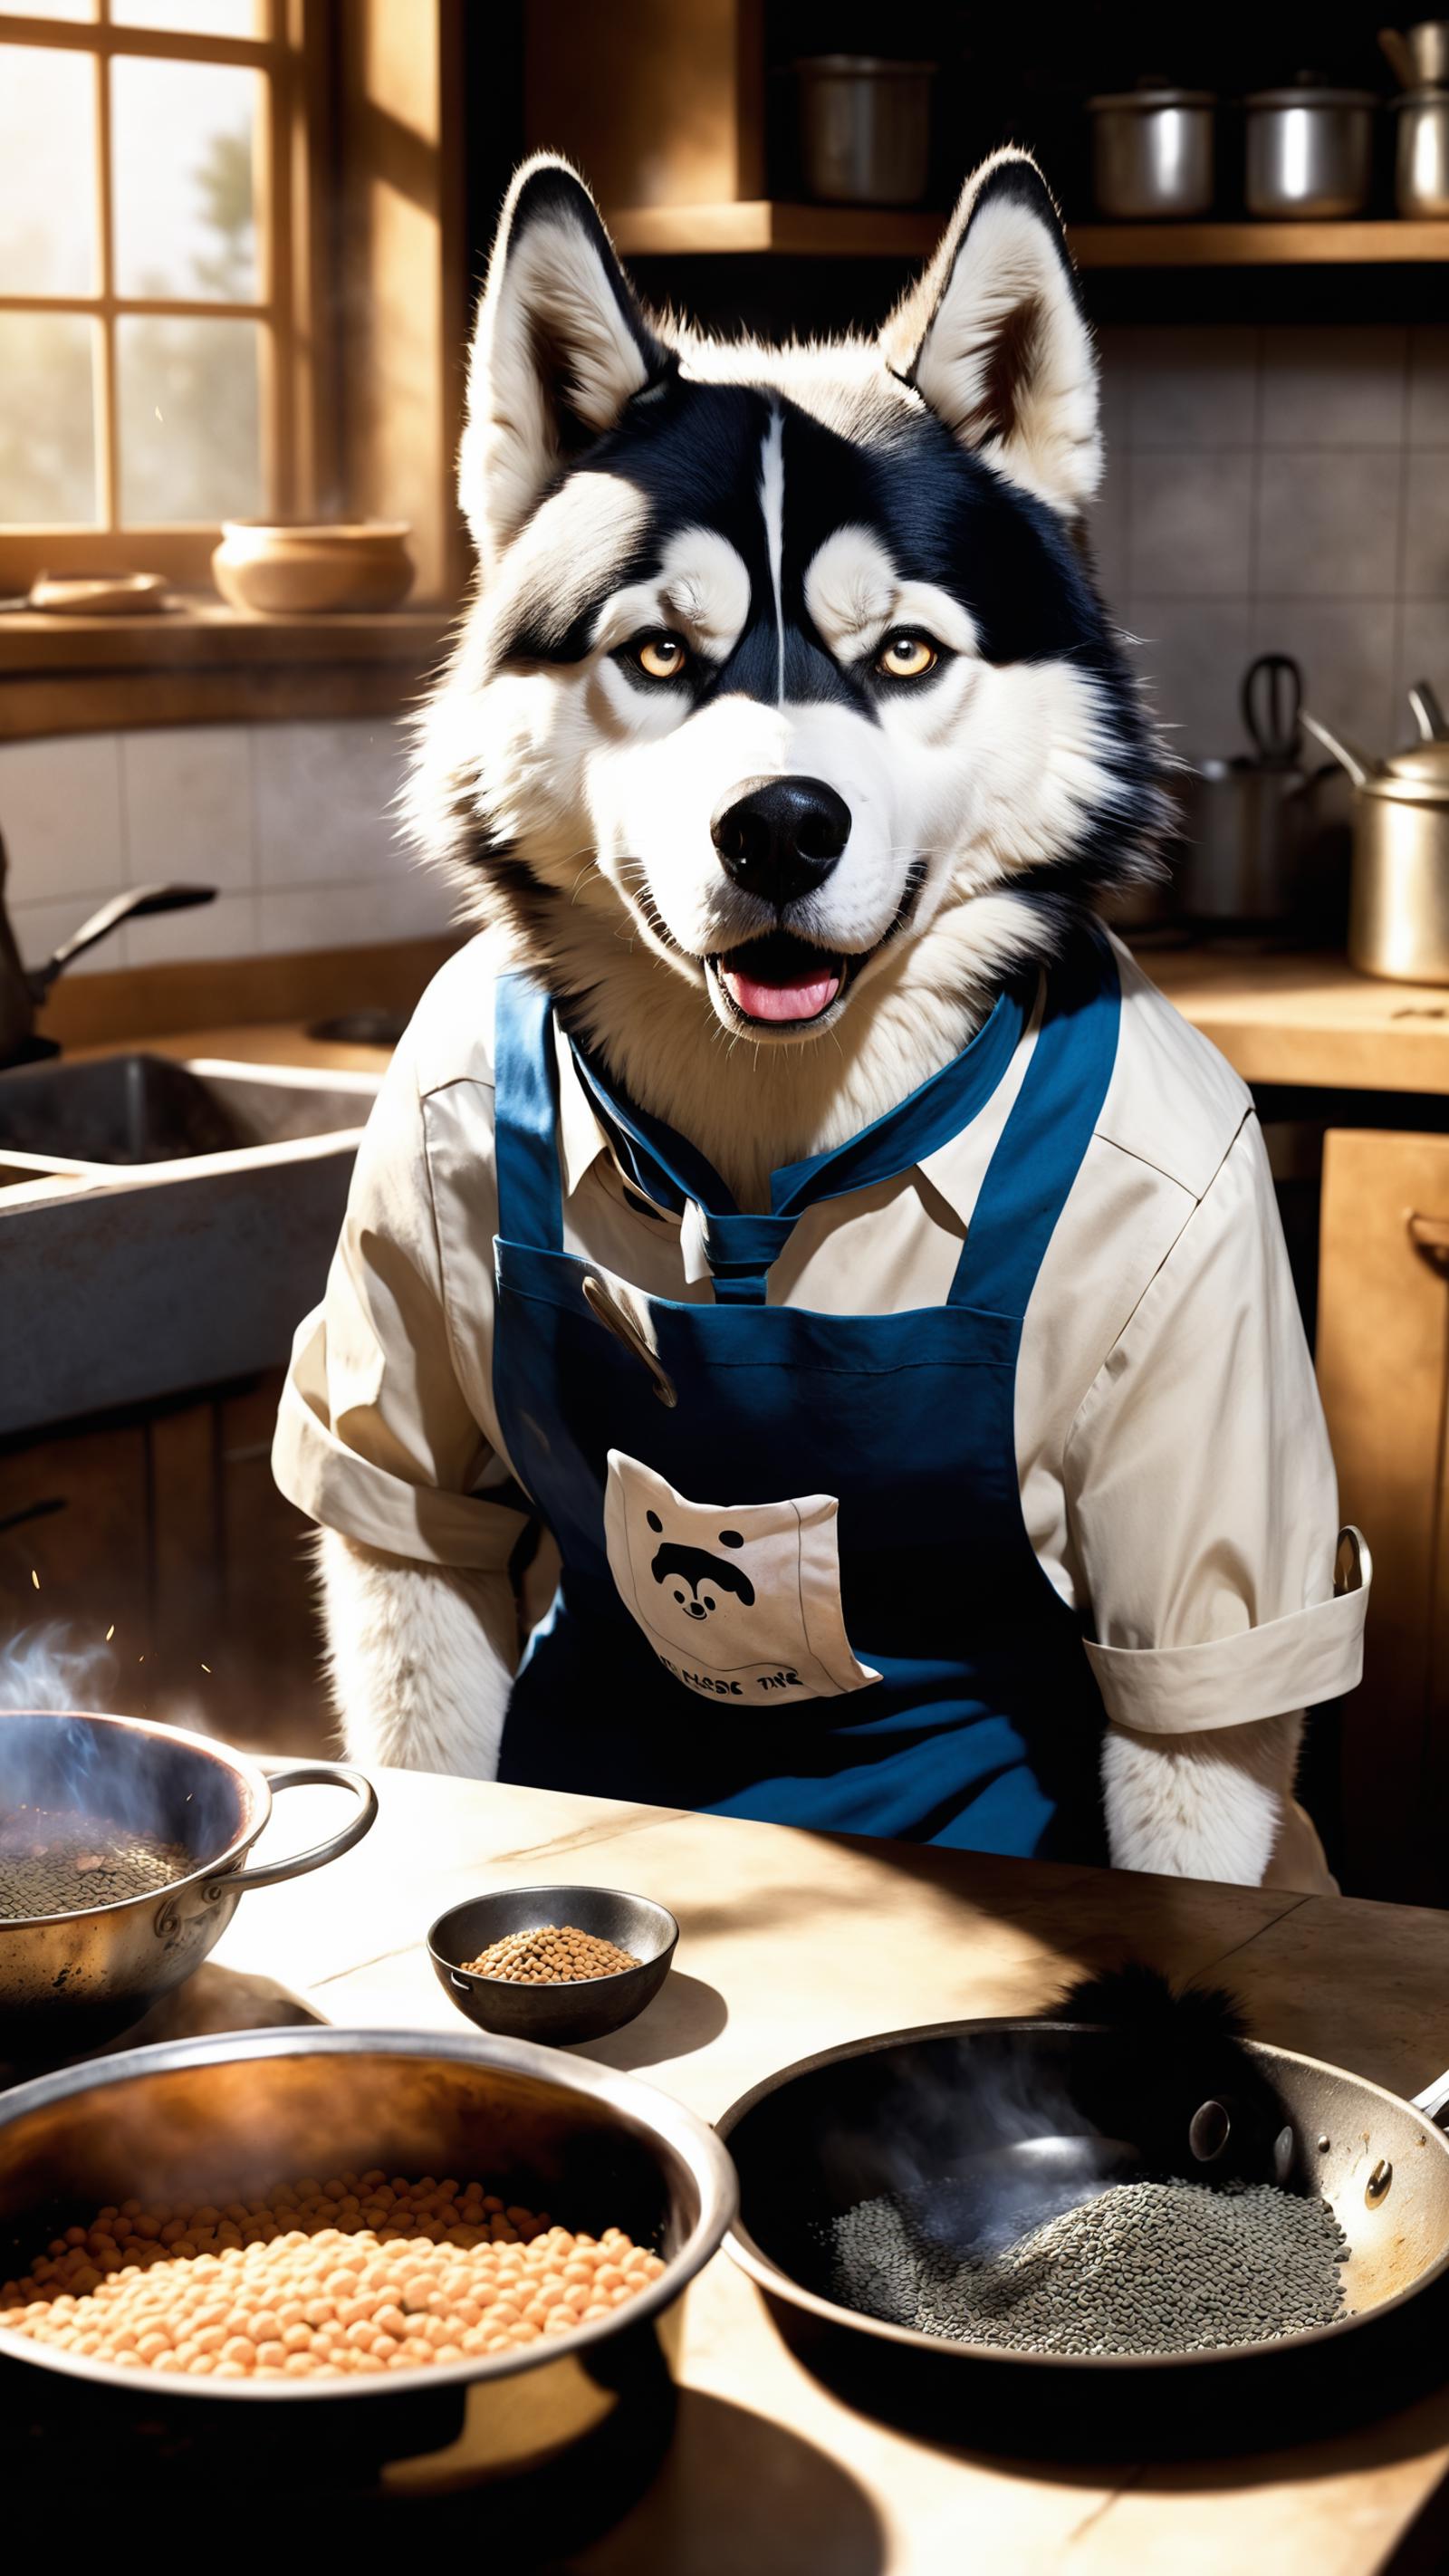 A Husky dog wearing a chef's outfit stands next to a bowl of food.